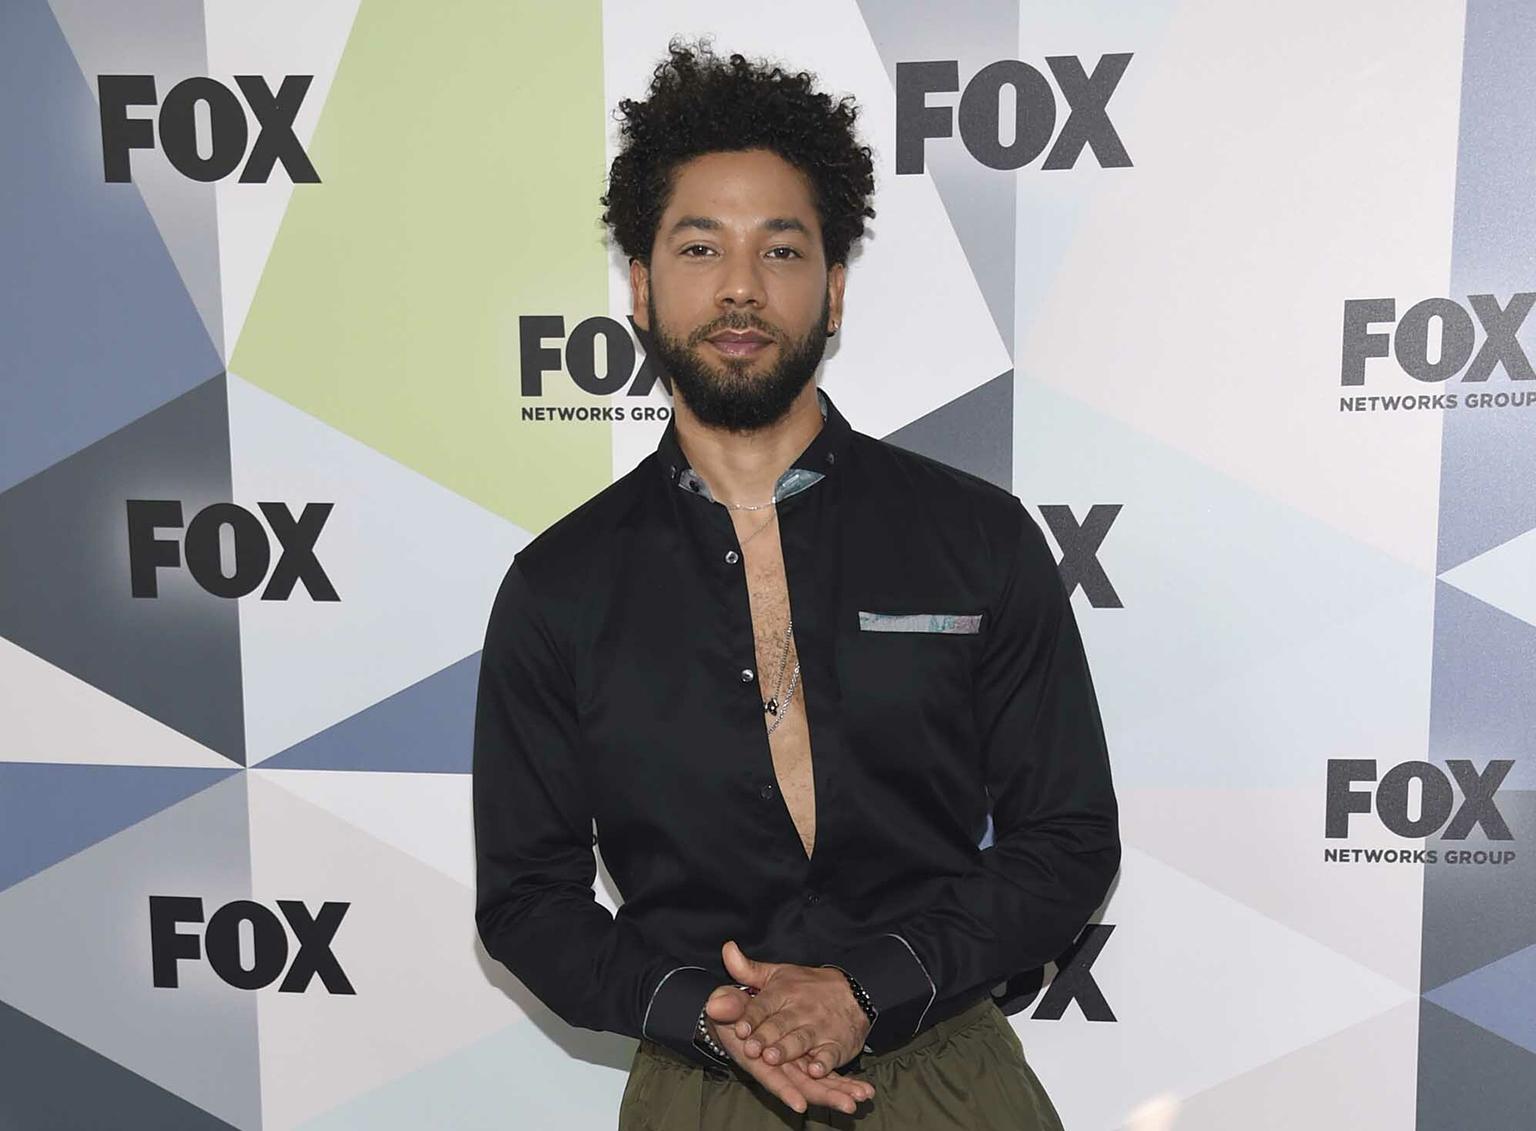 In this May 14, 2018 file photo, Jussie Smollett, a cast member in the TV series “Empire,” attends the Fox Networks Group 2018 programming presentation after-party in New York. (Photo by Evan Agostini / Invision / AP, File)